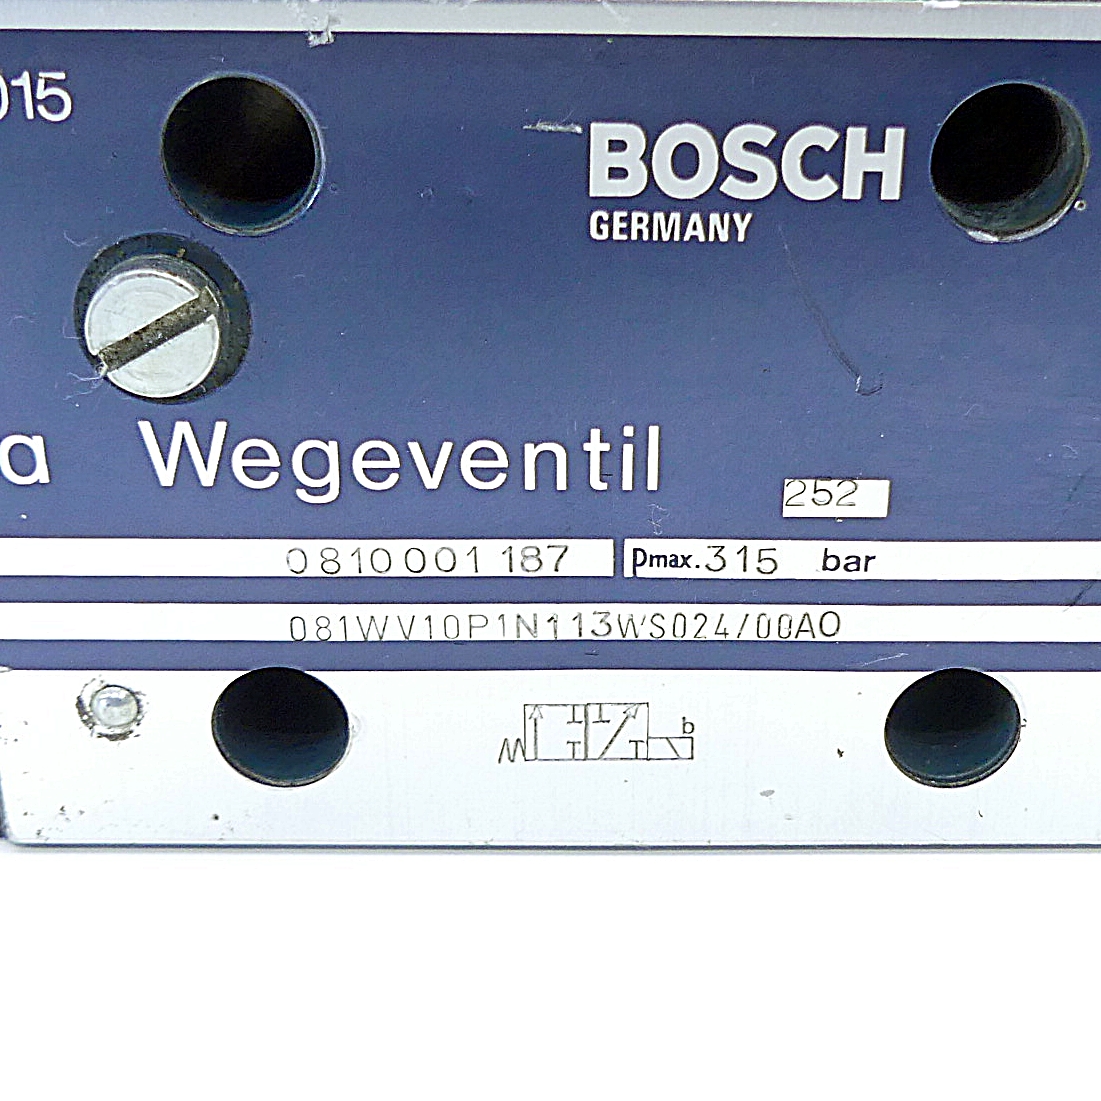 2/2 Directional valve Bosch 081WV10P1N113WS024/00A0 